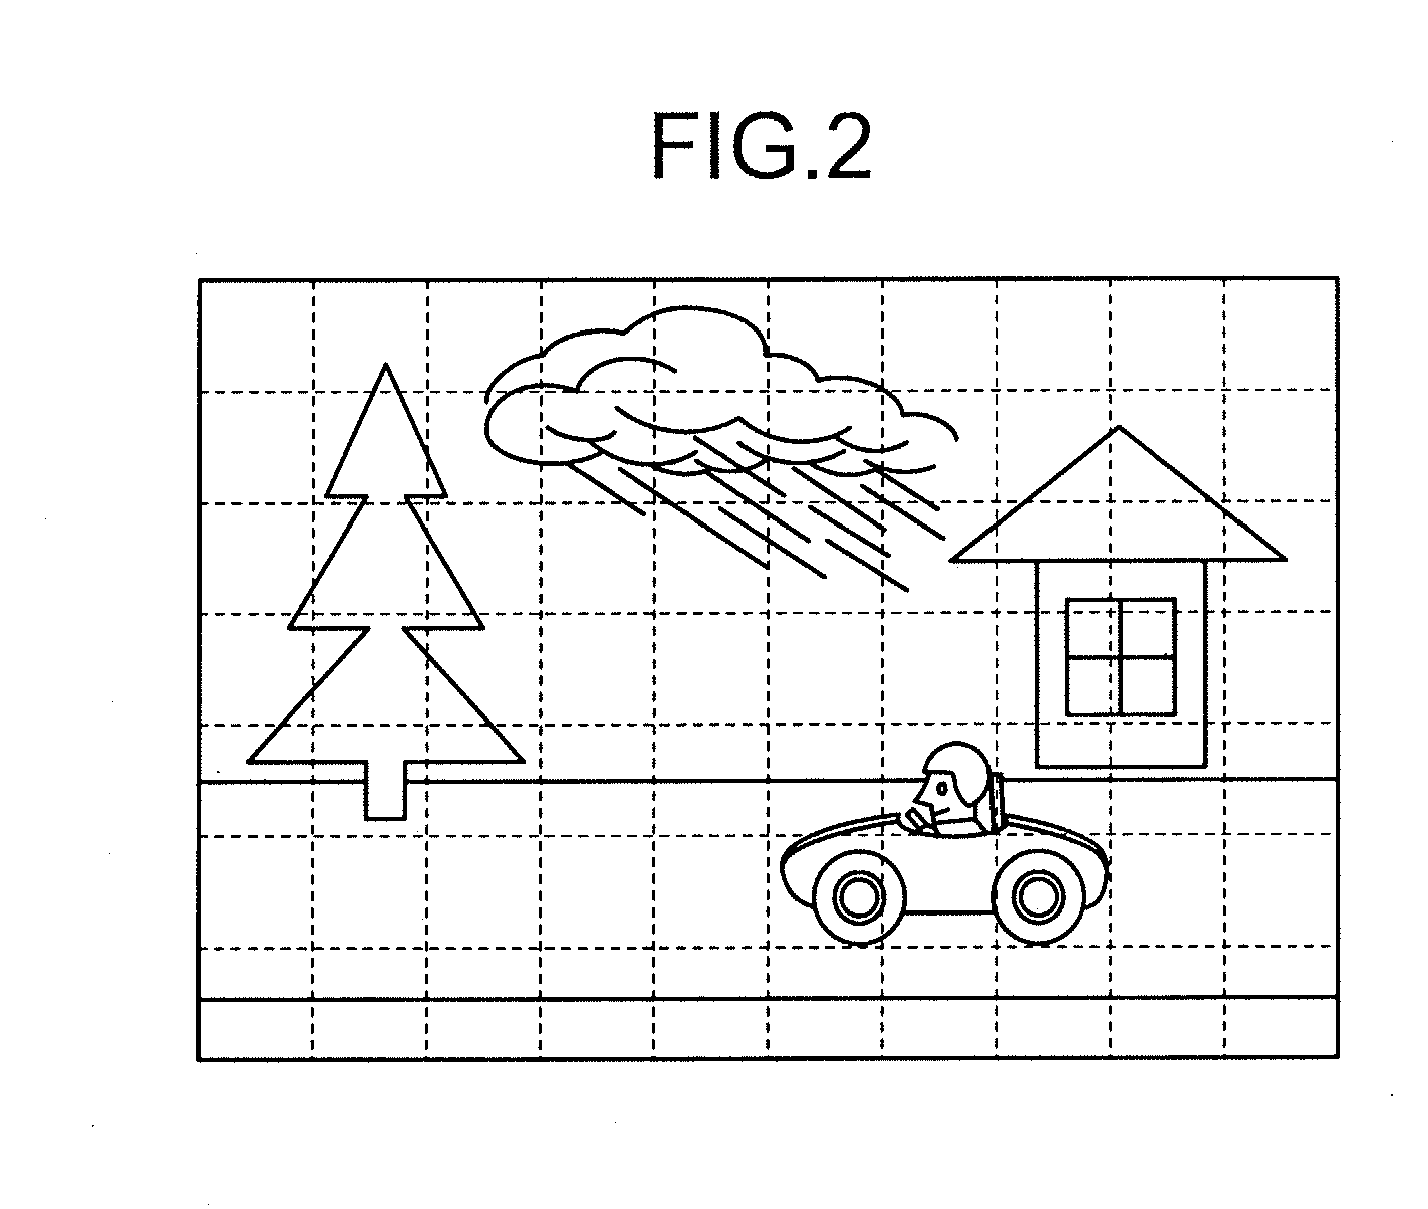 Image capturing apparatus, method of detecting tracking object, and computer program product